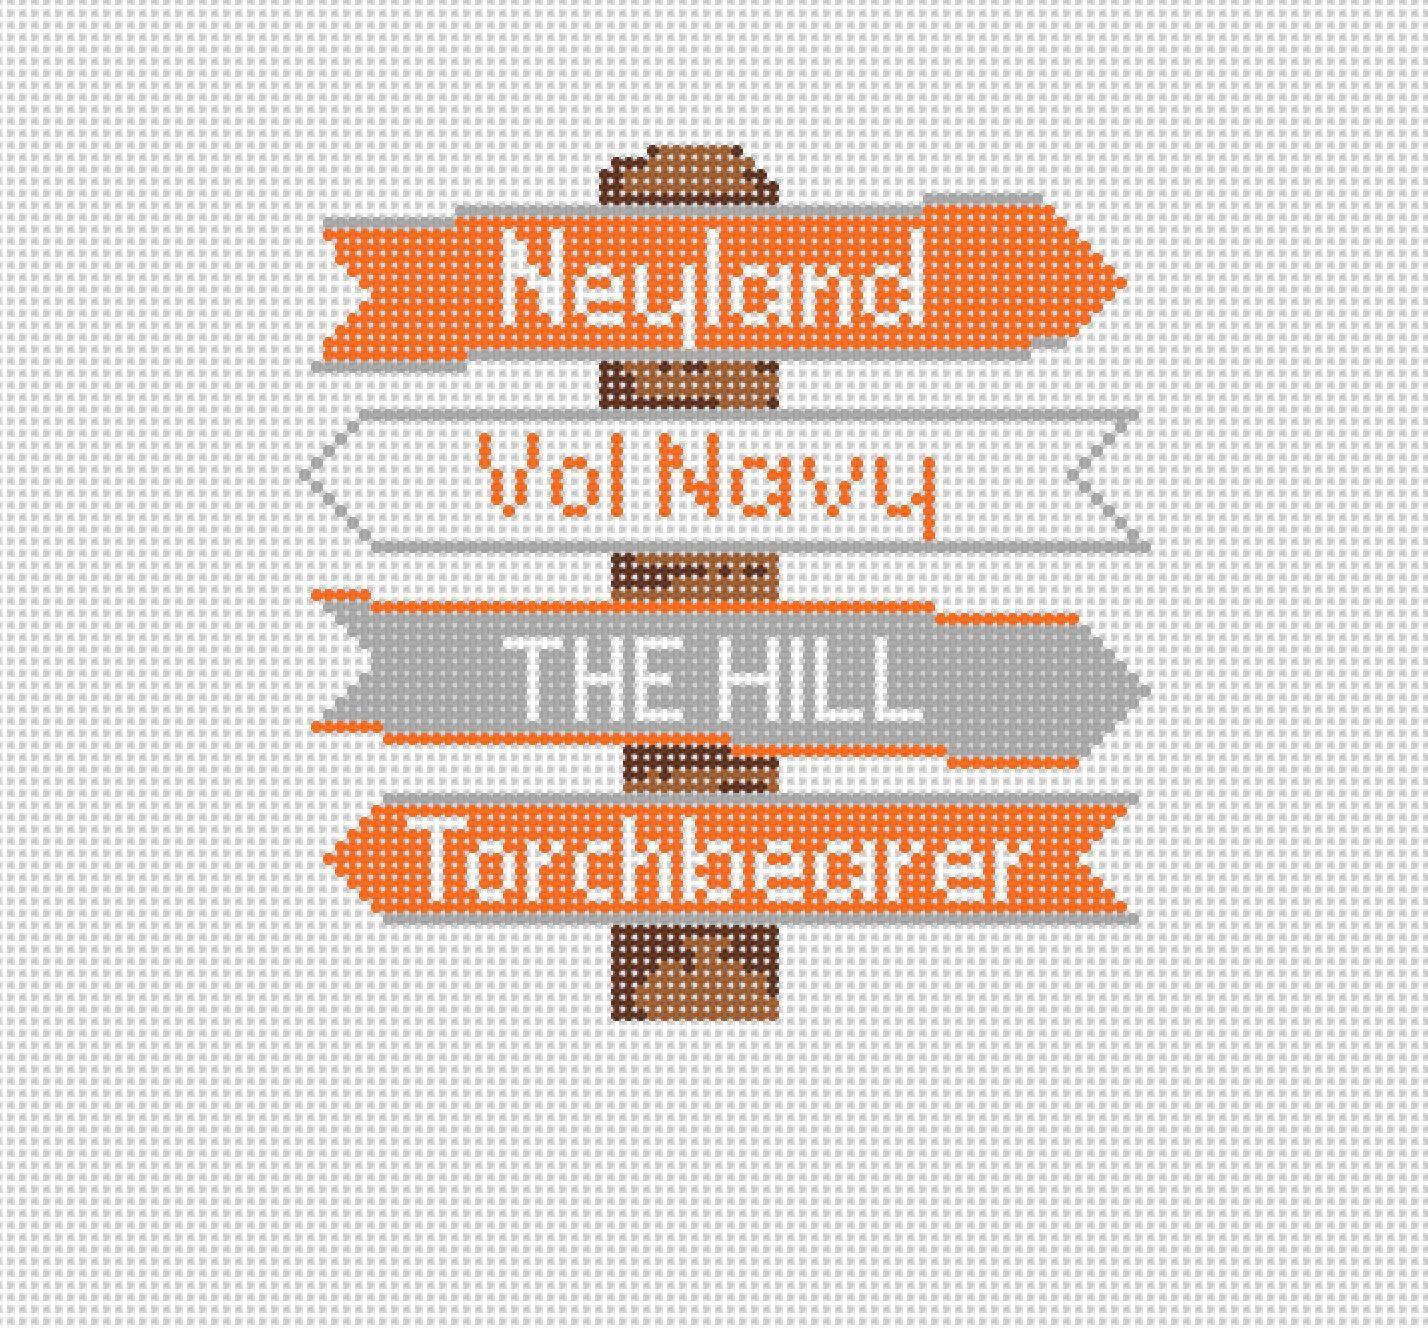 Tennessee College Icon Destination Sign - Needlepoint by Laura